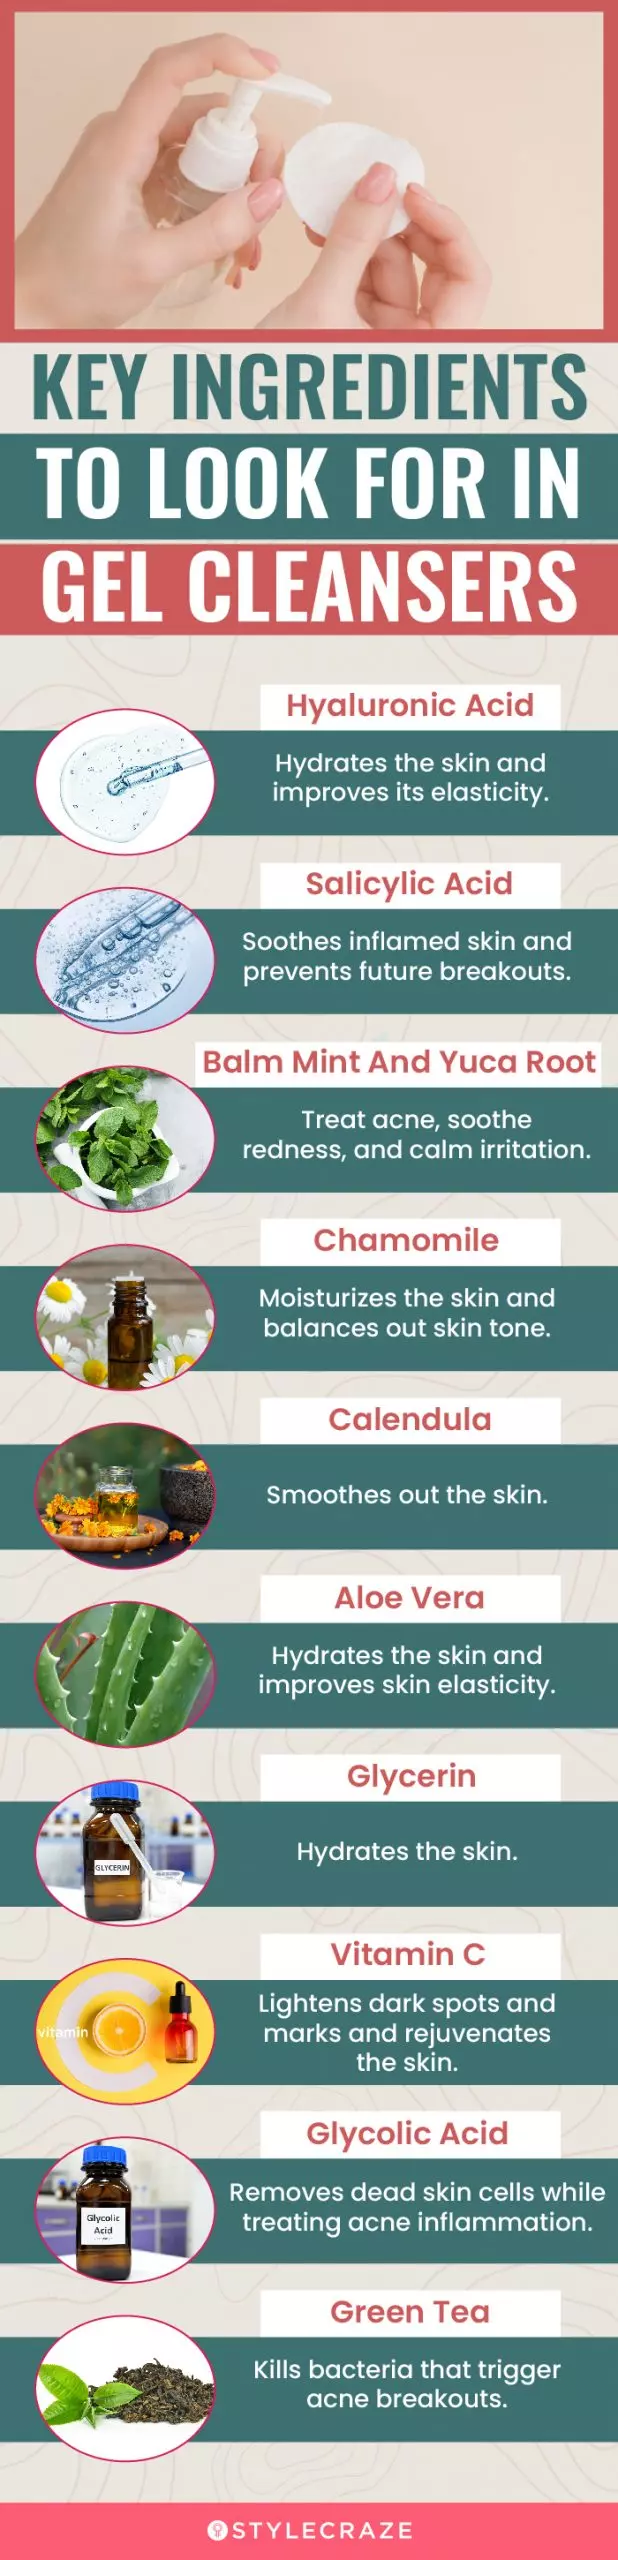 Key Ingredients To Look For In Gel Cleanser (infographic)